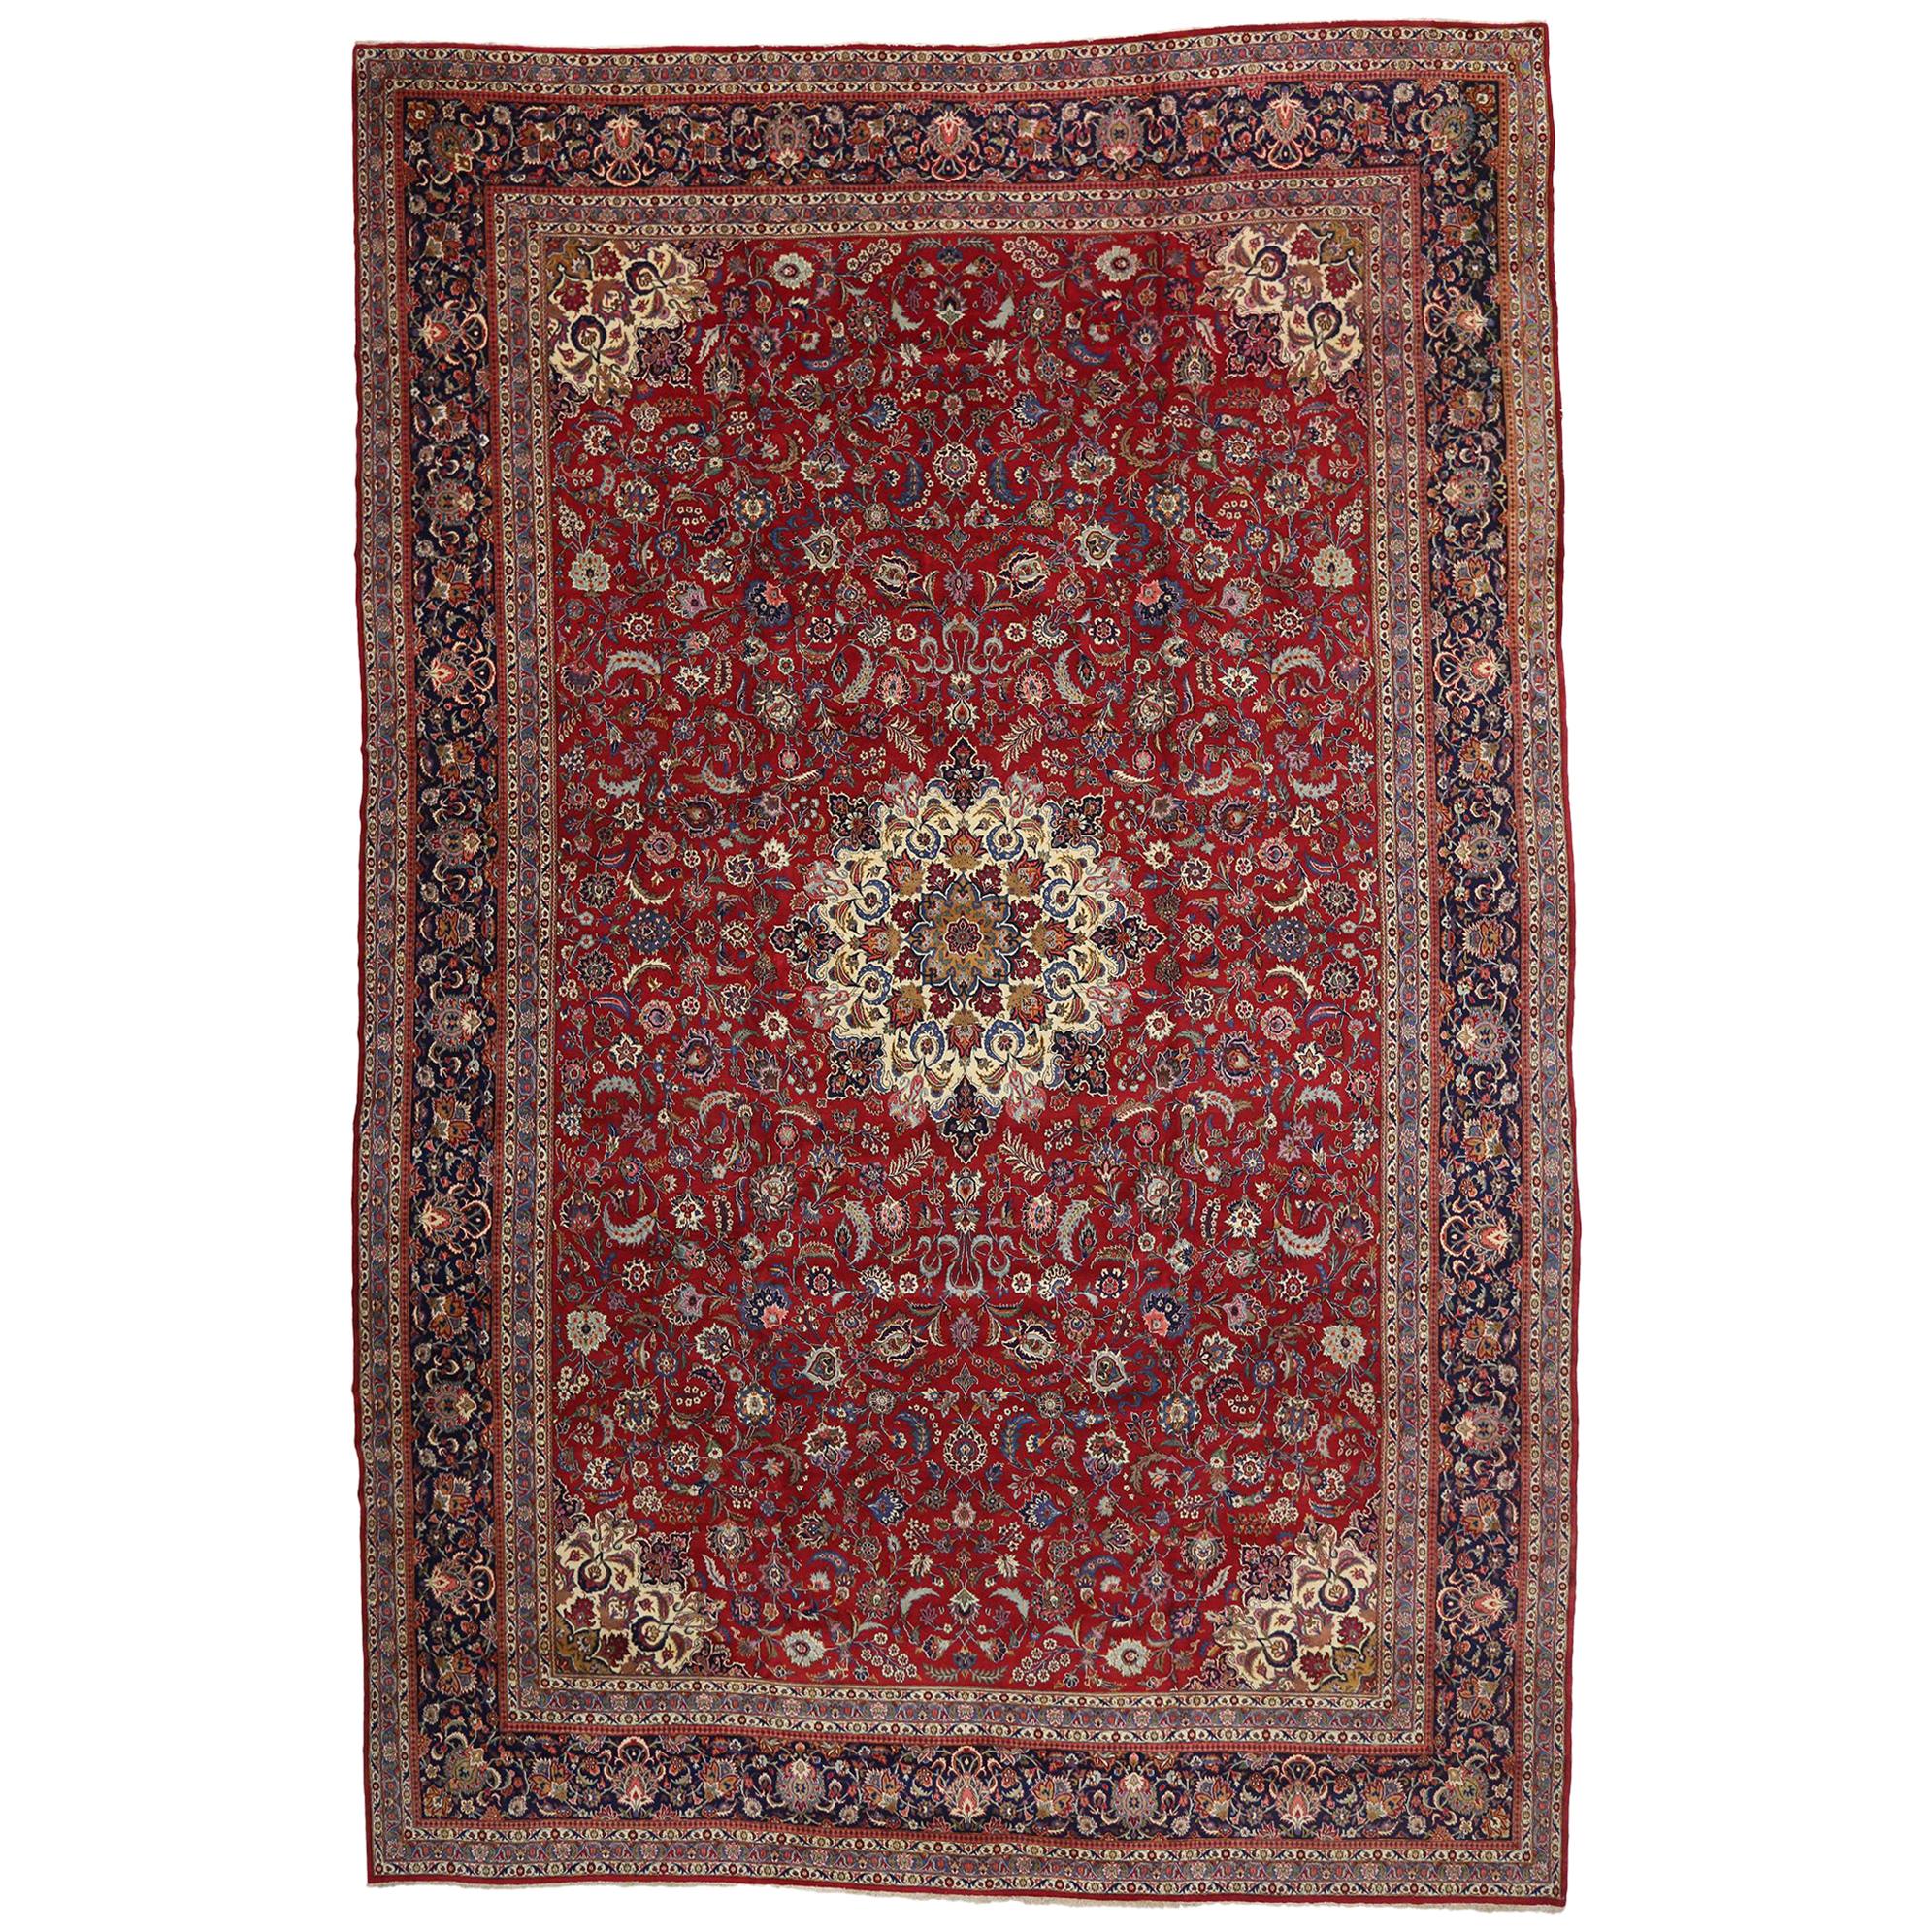 Vintage Persian Kashan Rug, Traditional Sensibility Meets Stately Decadence